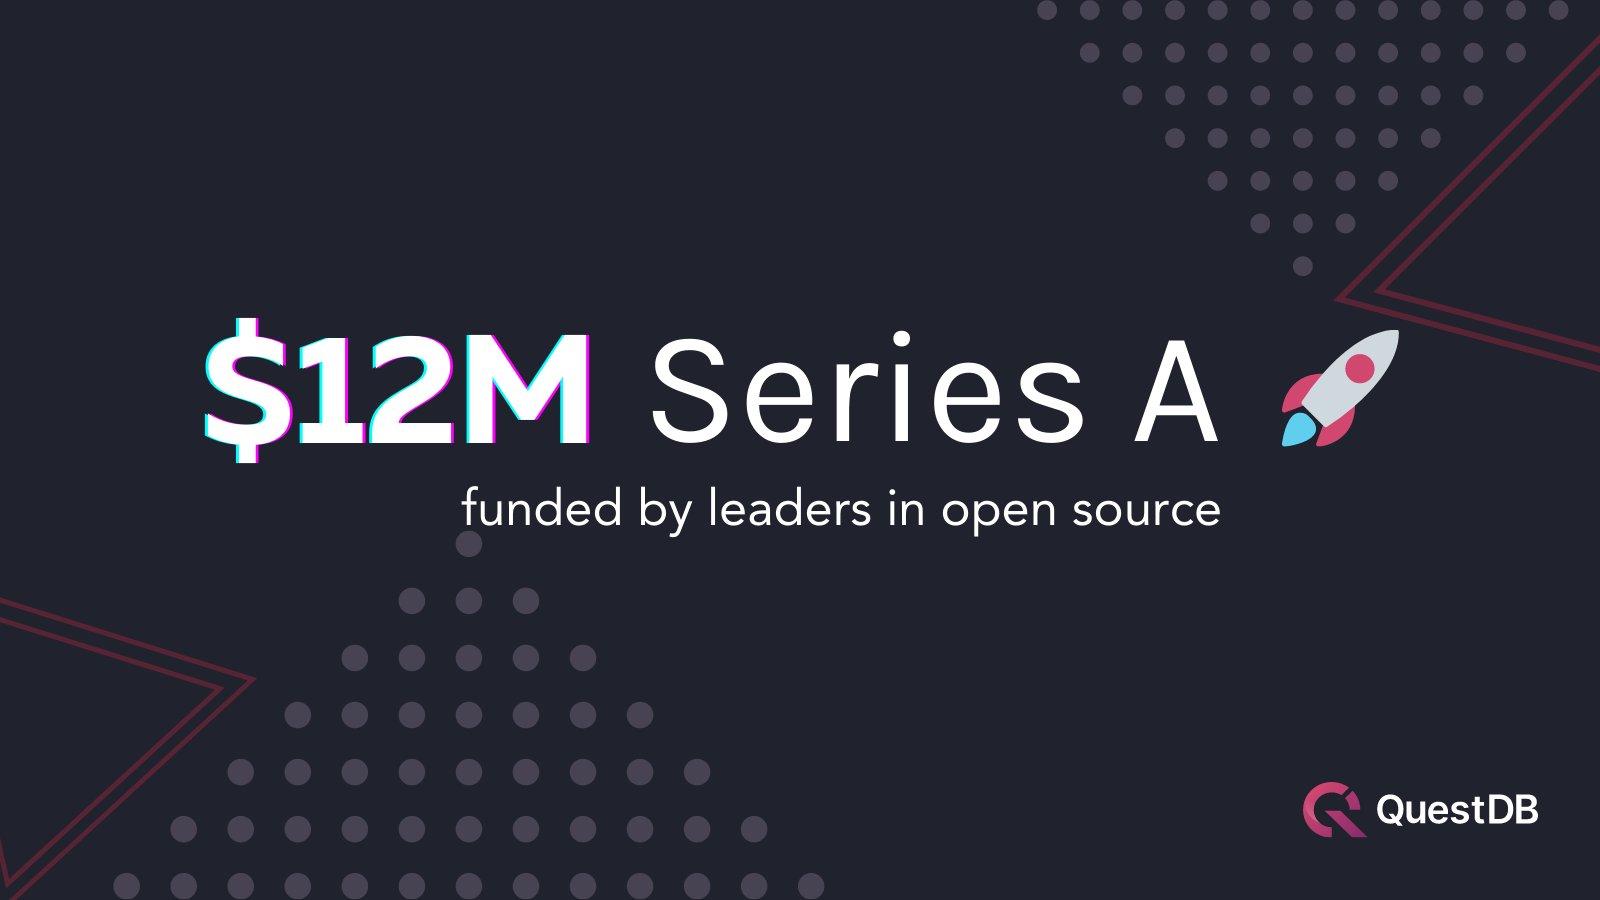 A graphic announcing twelve million dollars in Series A funding raised by QuestDB